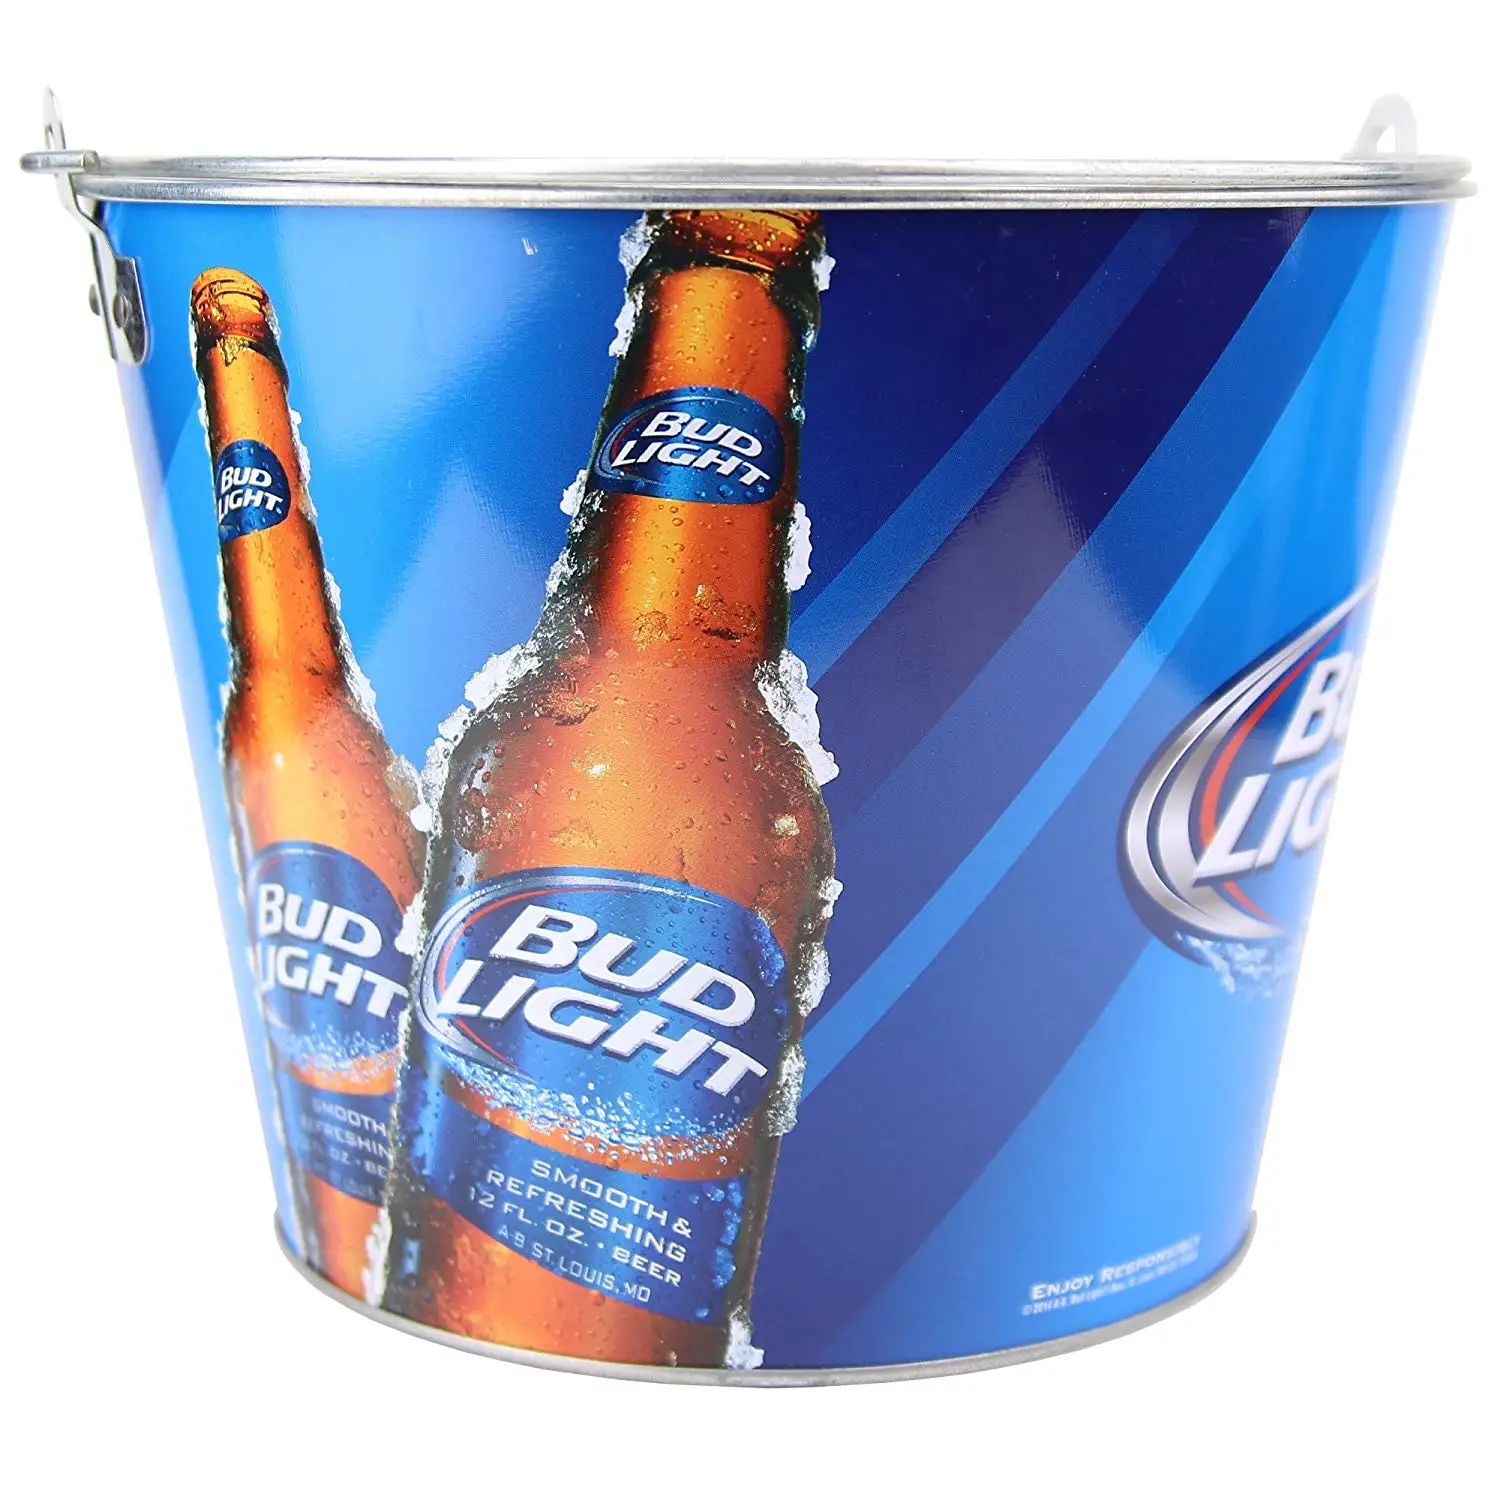 Budweiser Bud Light "The Summer Is Yours" 5 Quart Ice Bucket Set of 2 NEW & FS 